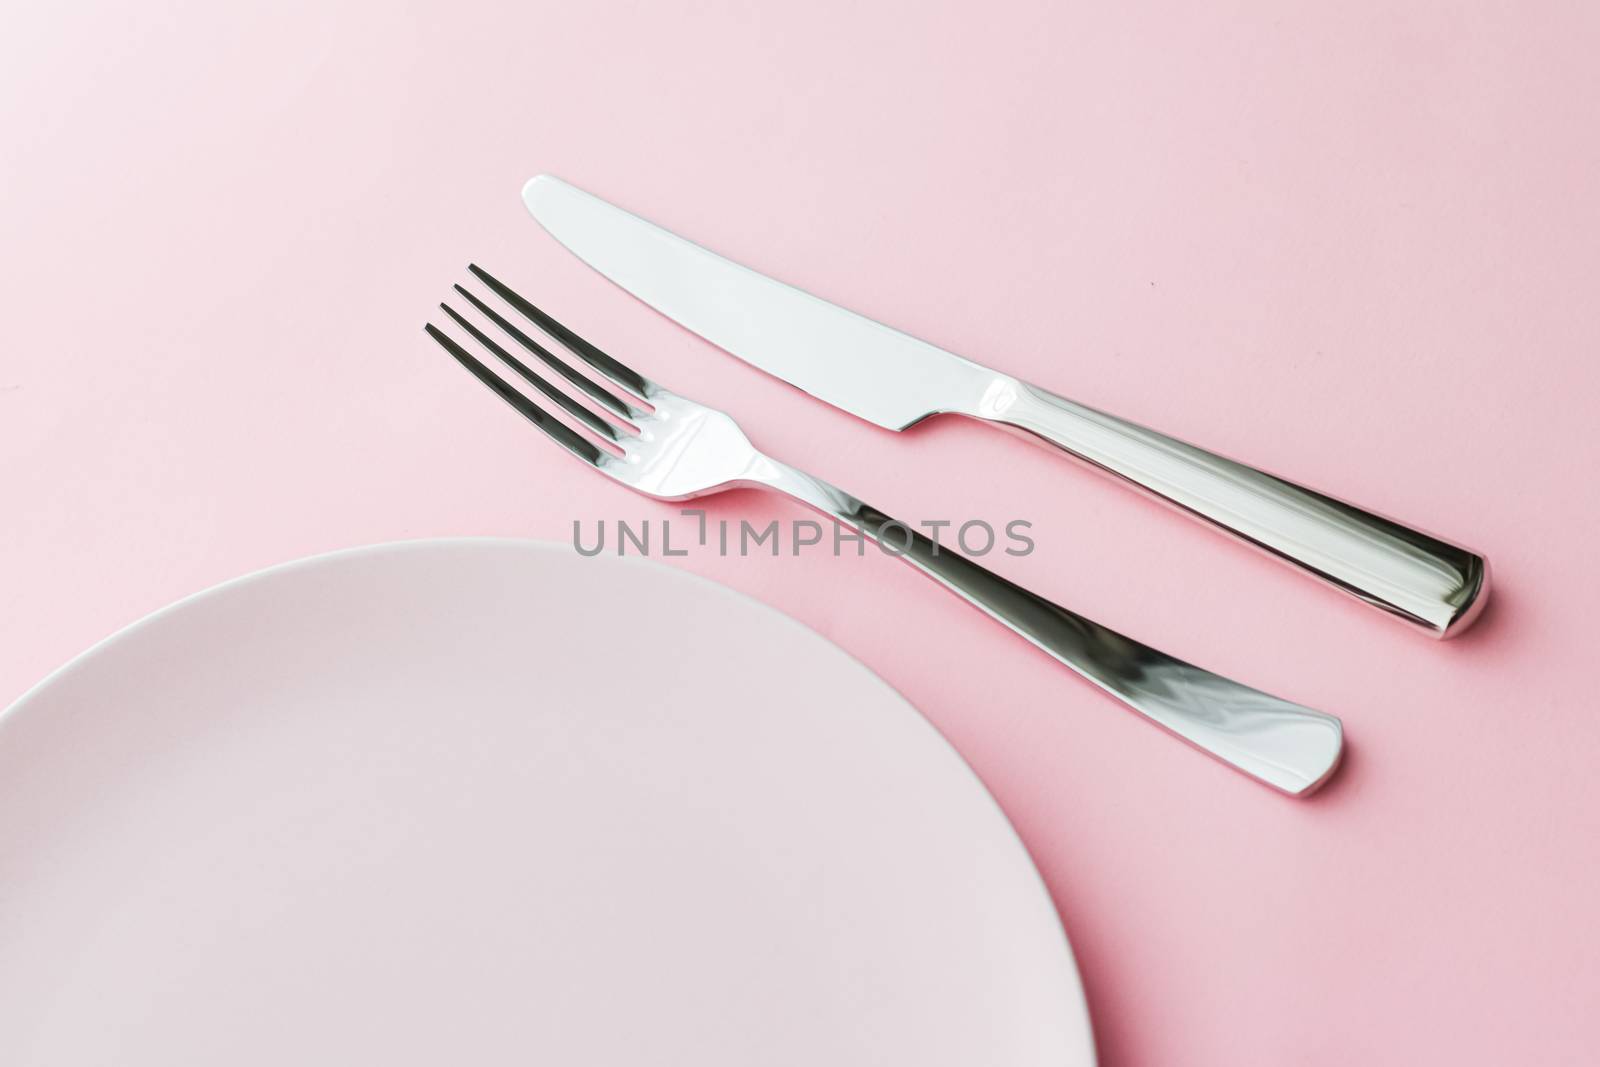 Empty plate and cutlery as mockup set on pink background, top tableware for chef table decor and menu branding by Anneleven